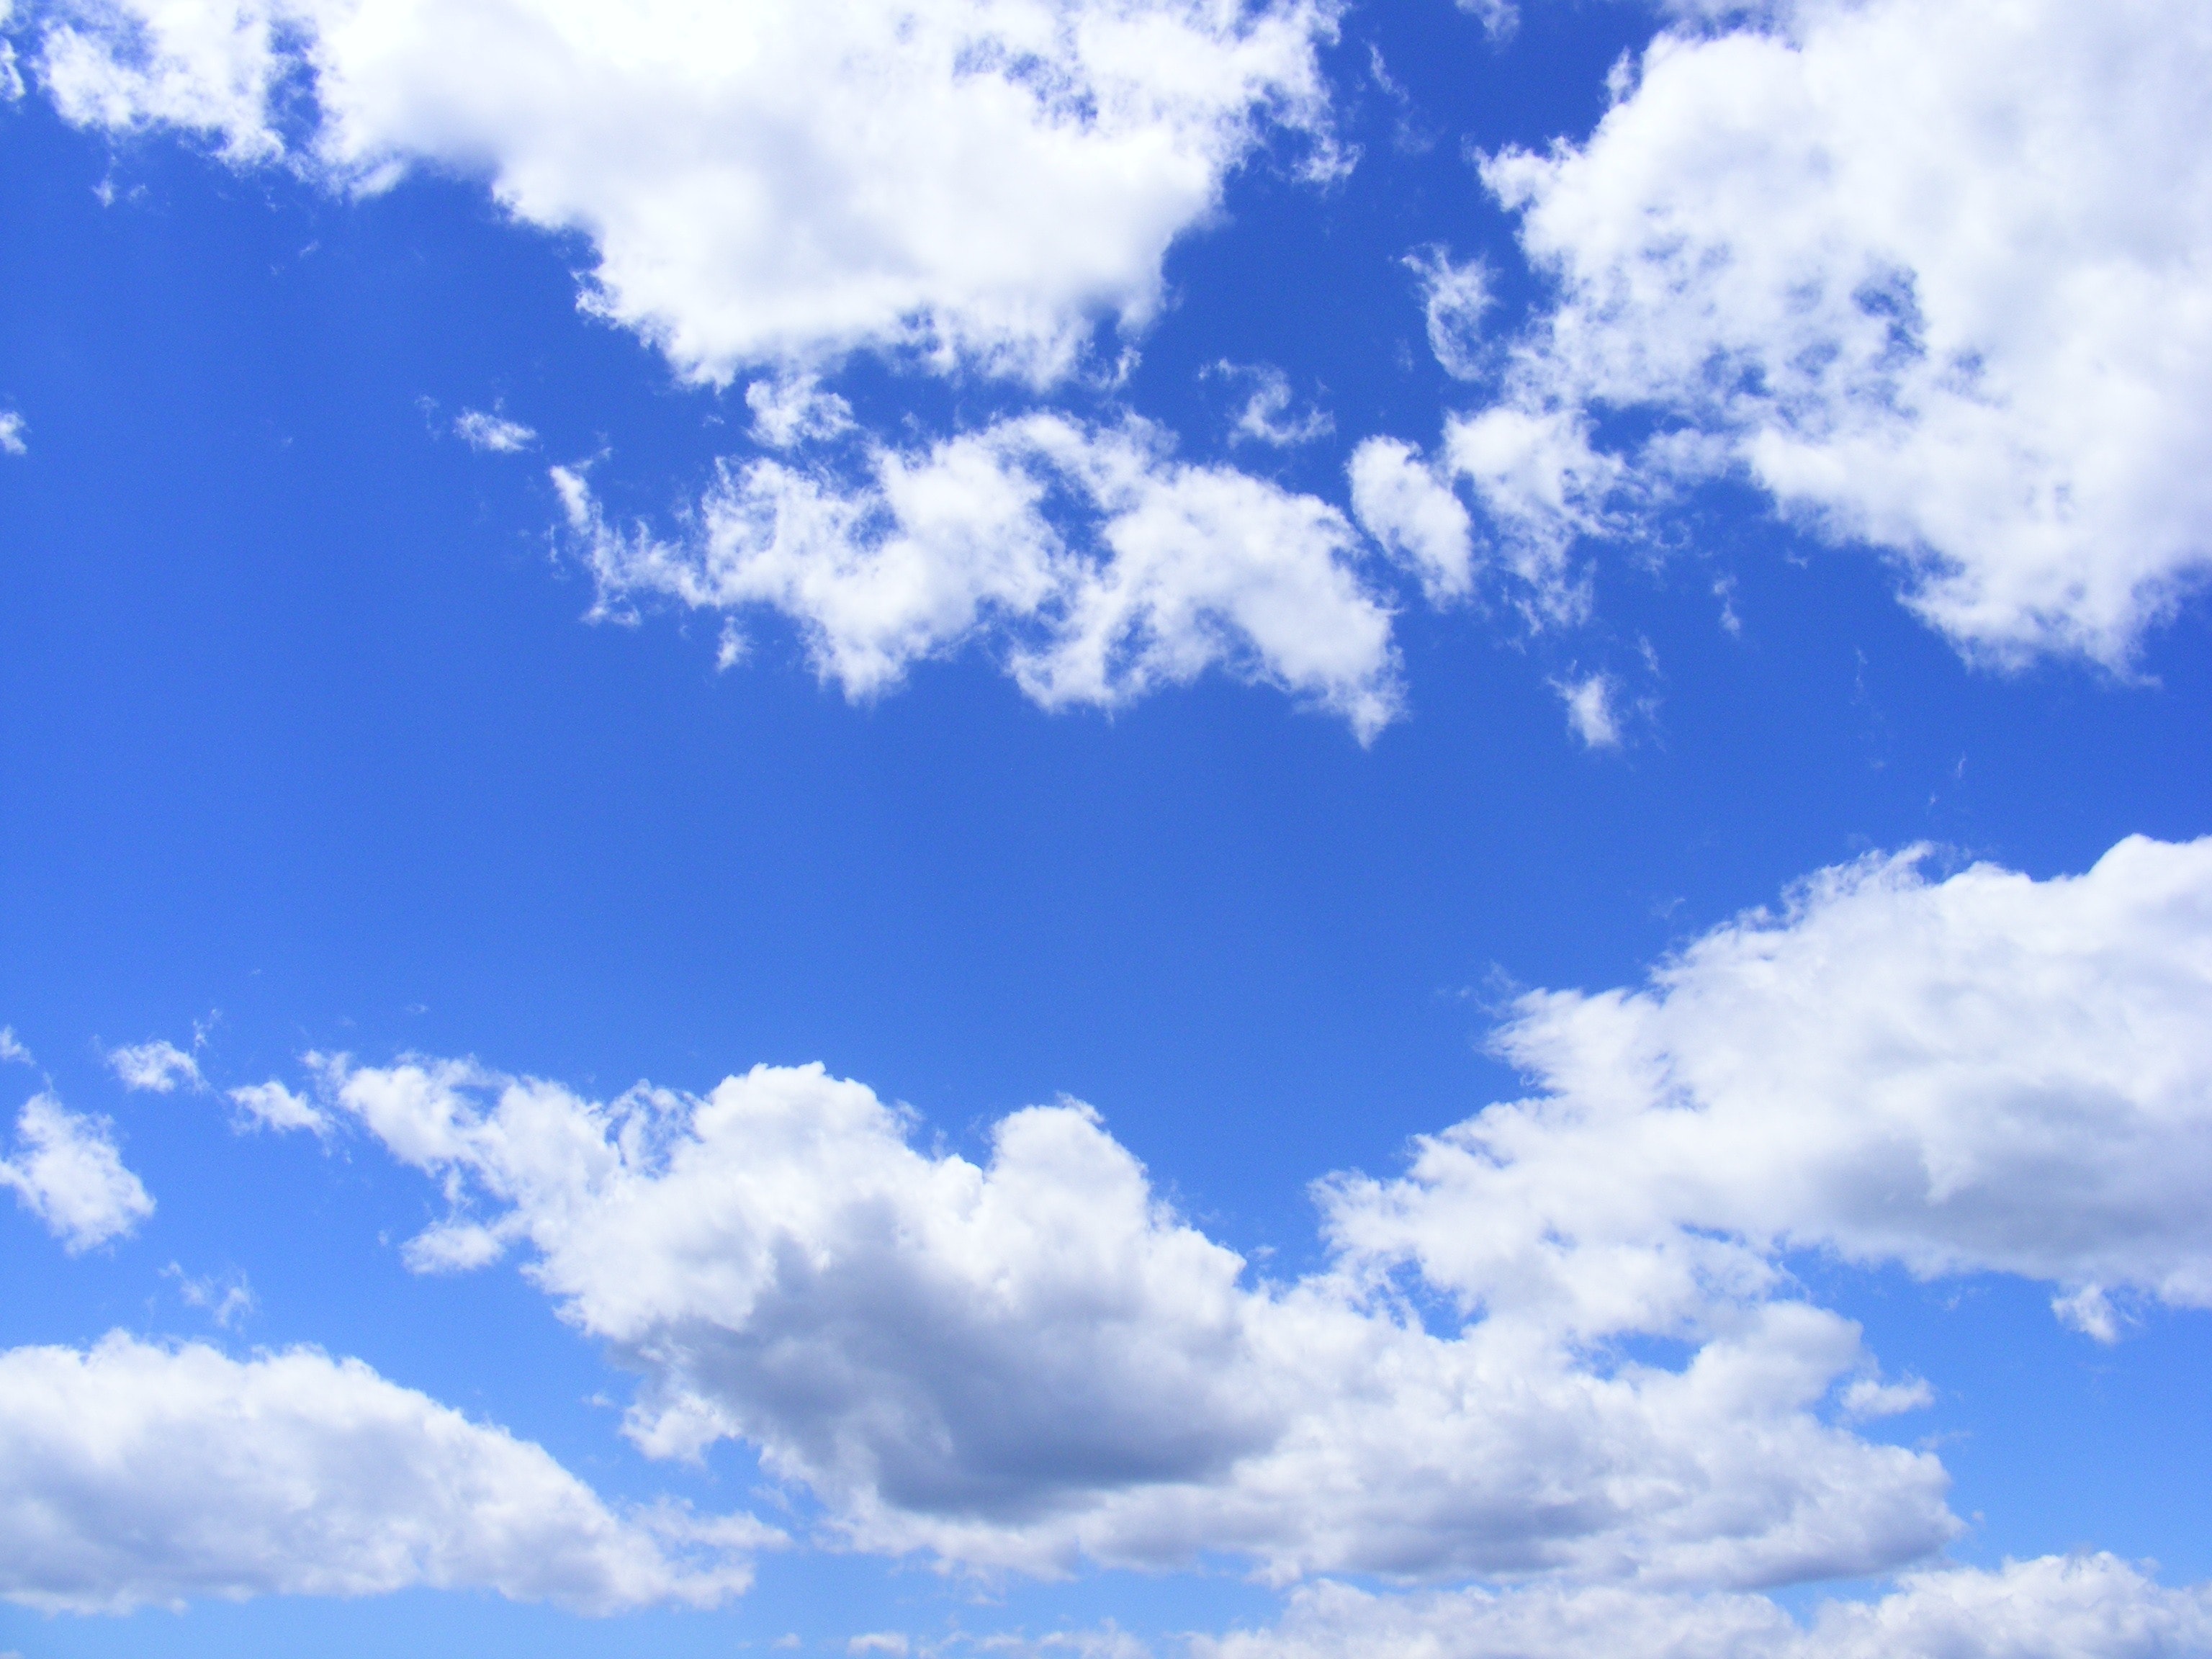 Blue Skies, Blue, Clouds, Day, Nature, HQ Photo